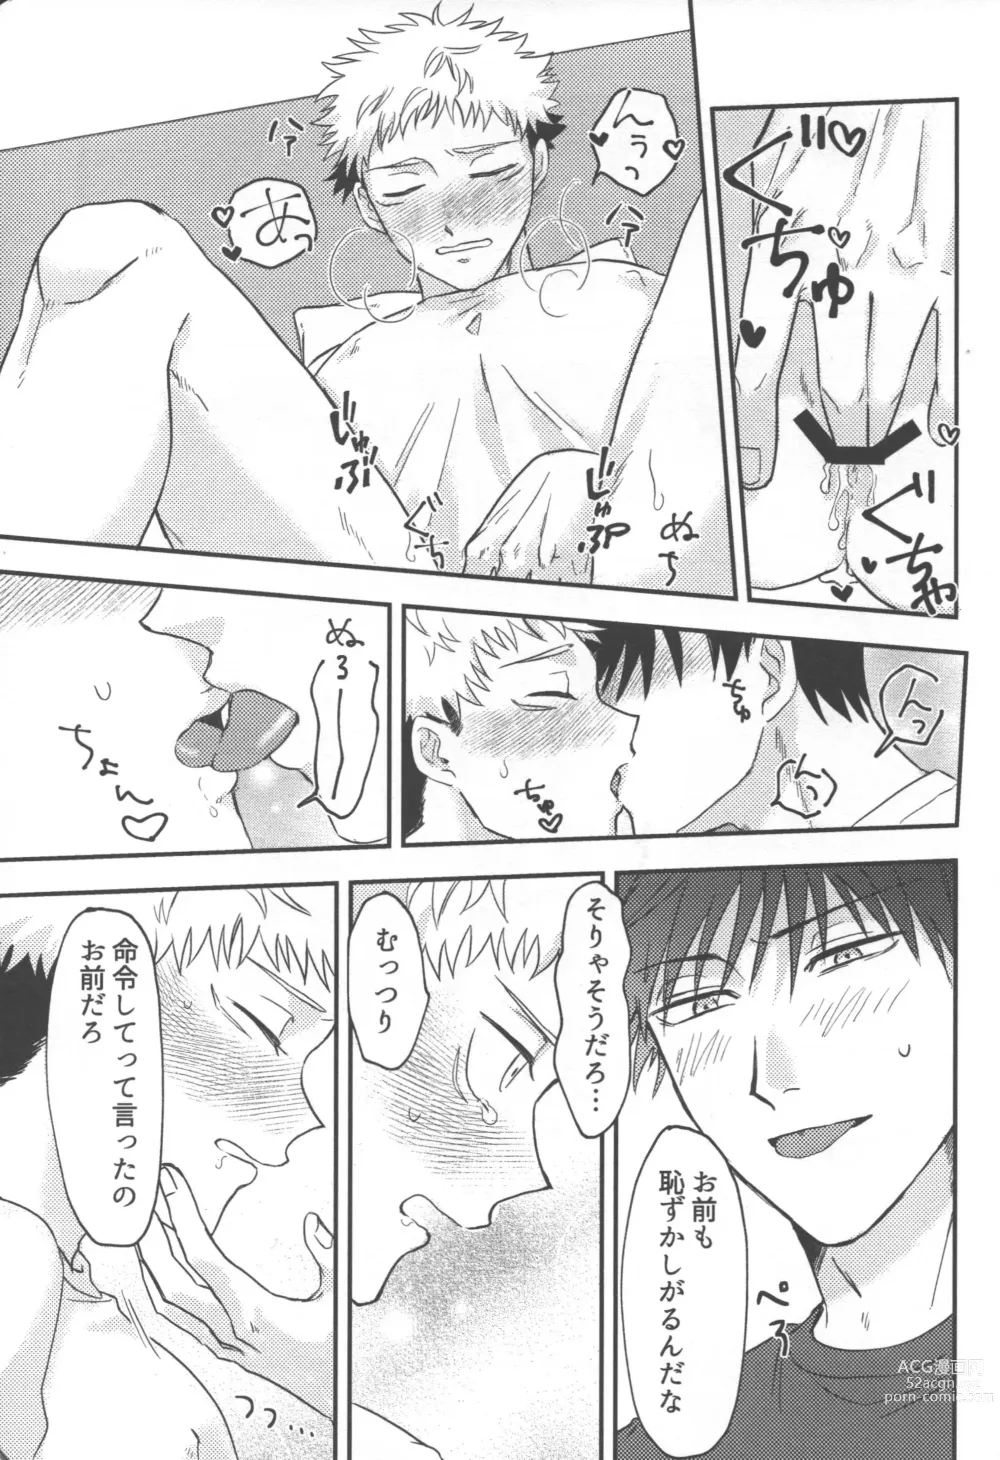 Page 24 of doujinshi Dont Look at ME Like That.